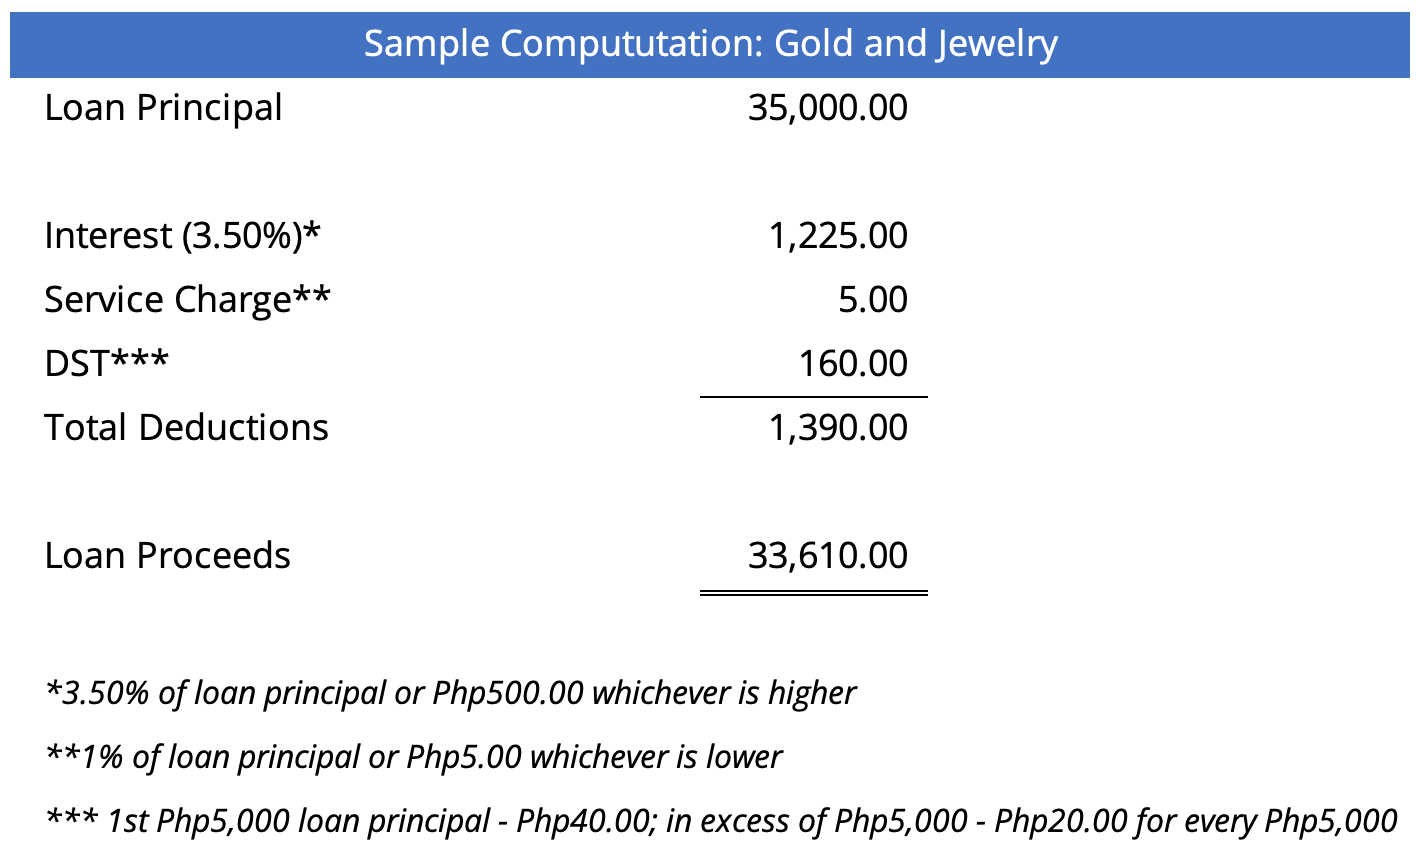 Sample Computation of Gold and Jewelry